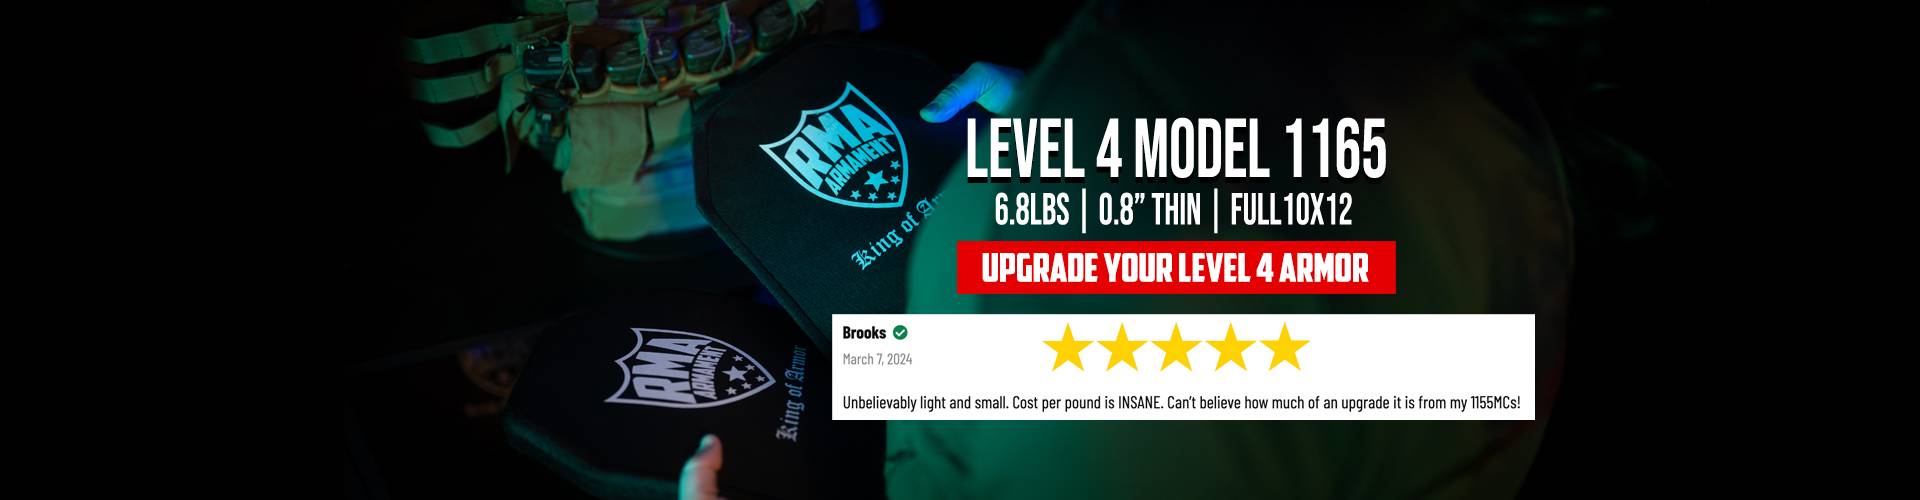 Level 4 1165 Review Main Page